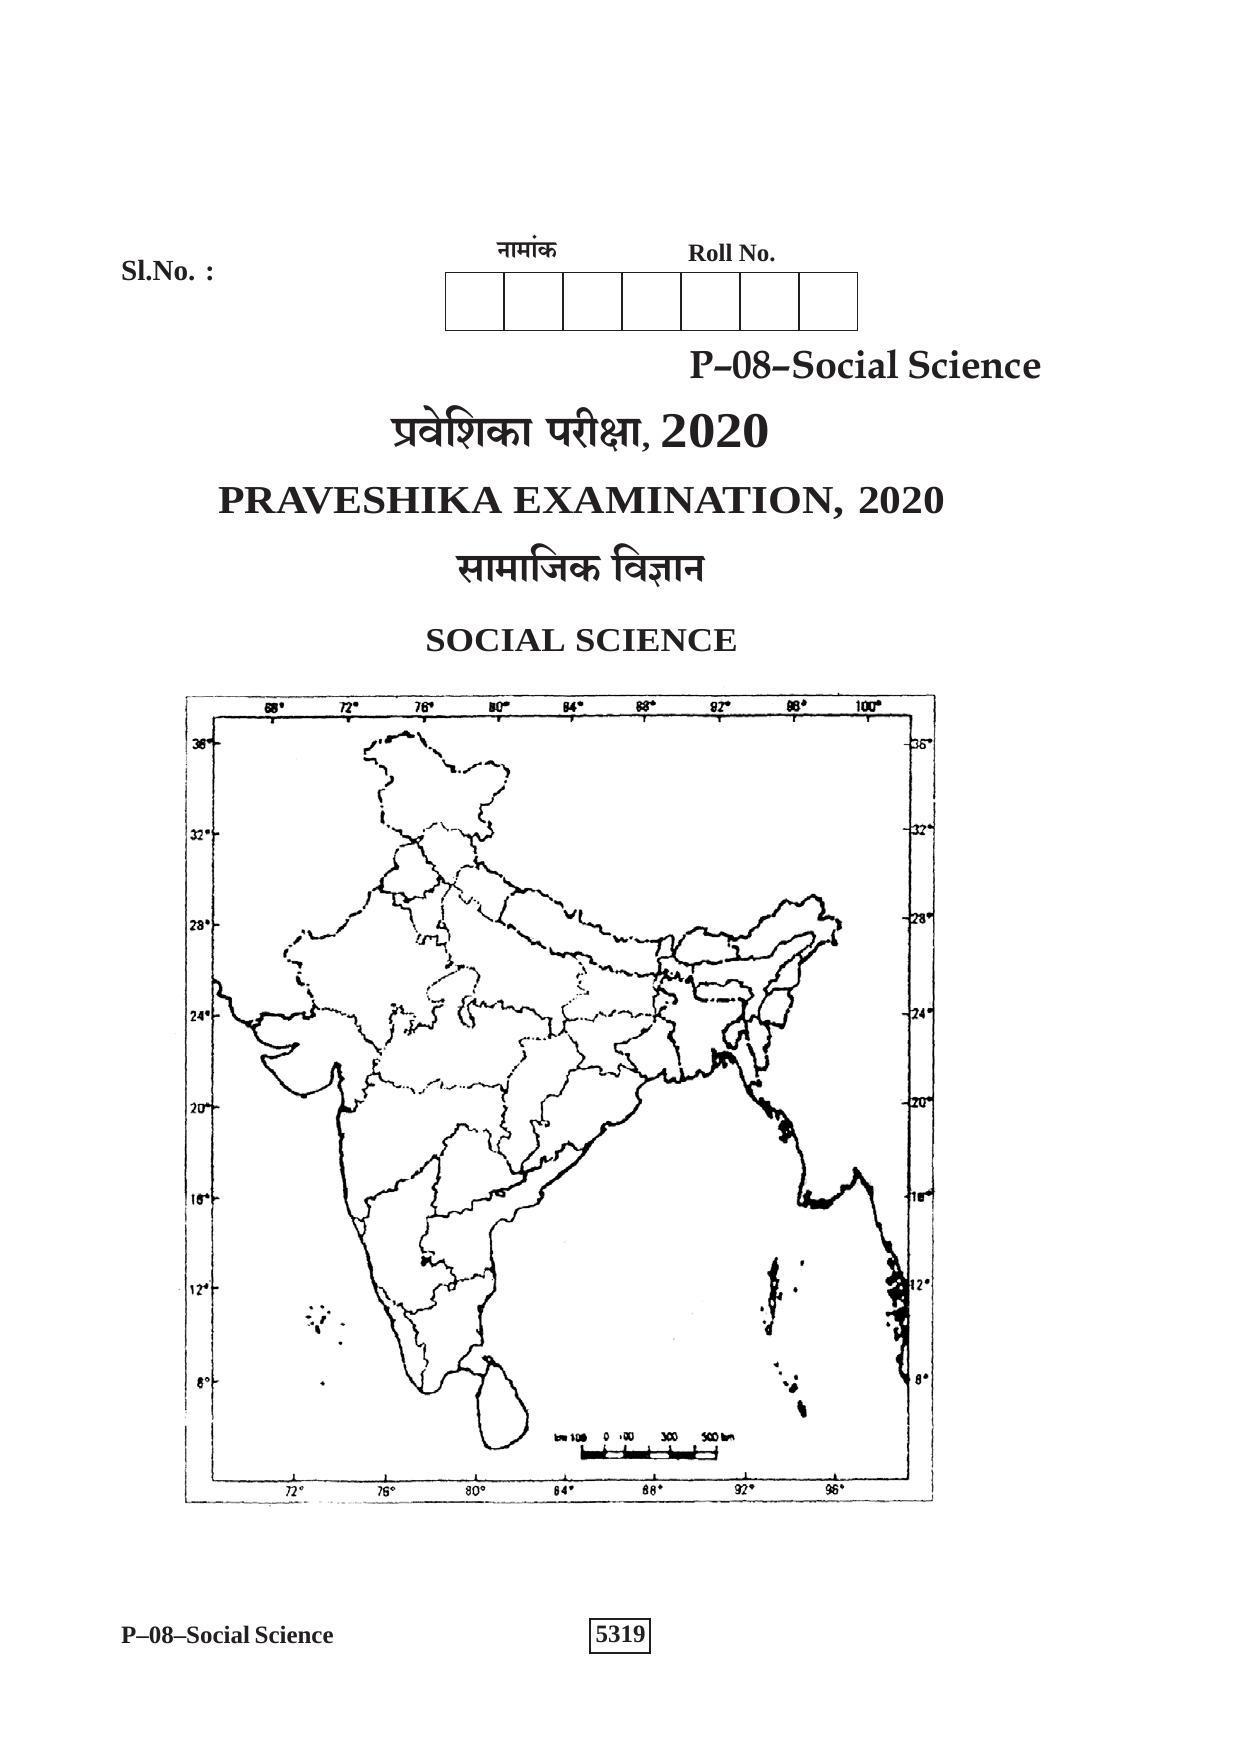 RBSE 2020 Social Science Praveshika Question Paper - Page 9